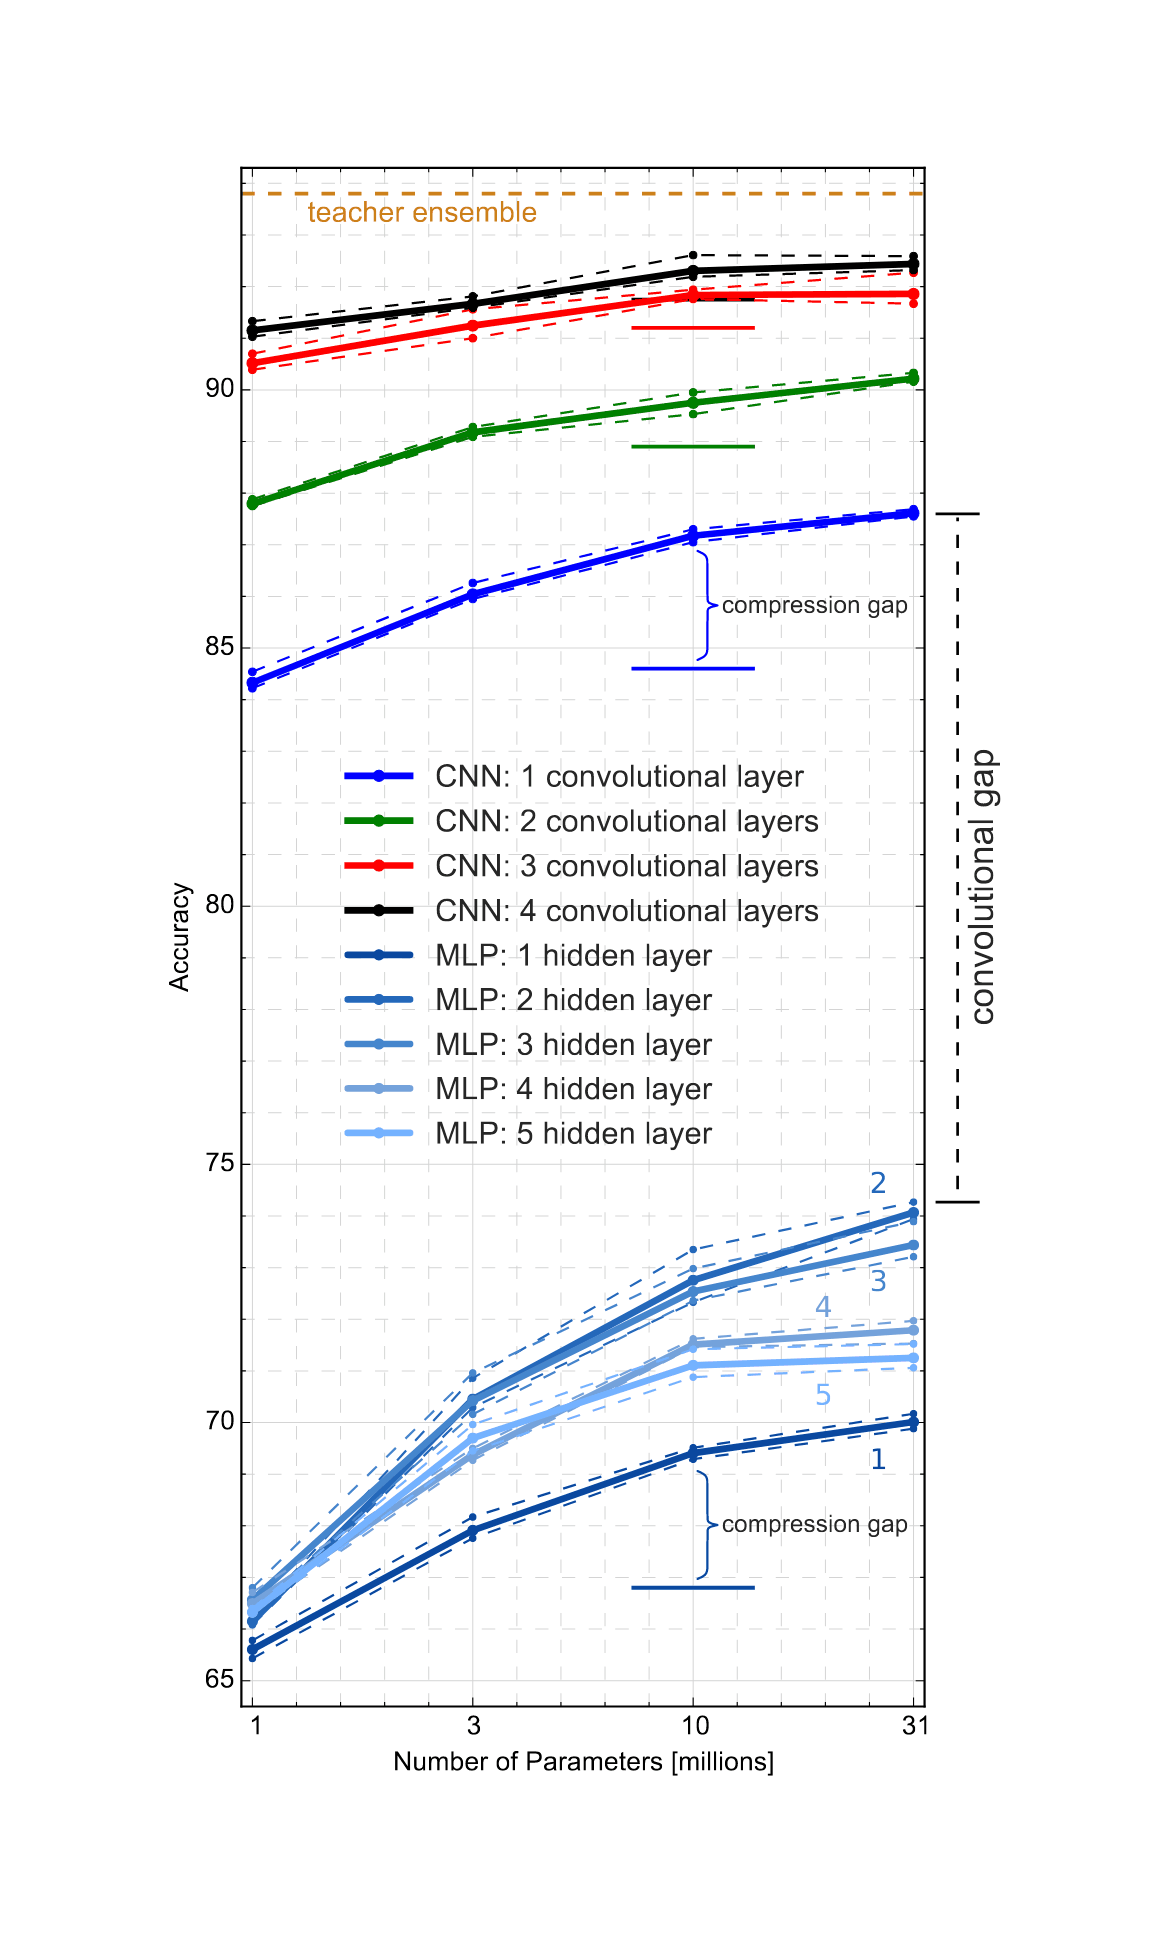 Figure 1: Accuracy of student models with different architectures trained to mimic the CIFAR10 ensemble. The average performance of the 5 best models of each hyperparameter-optimization experiment is shown, together with dashed lines indicating the accuracy of the best and the fifth best model from each setting. The short horizontal lines at 10M parameters are the accuracy of models trained without compression on the original 0/​​1 hard targets.